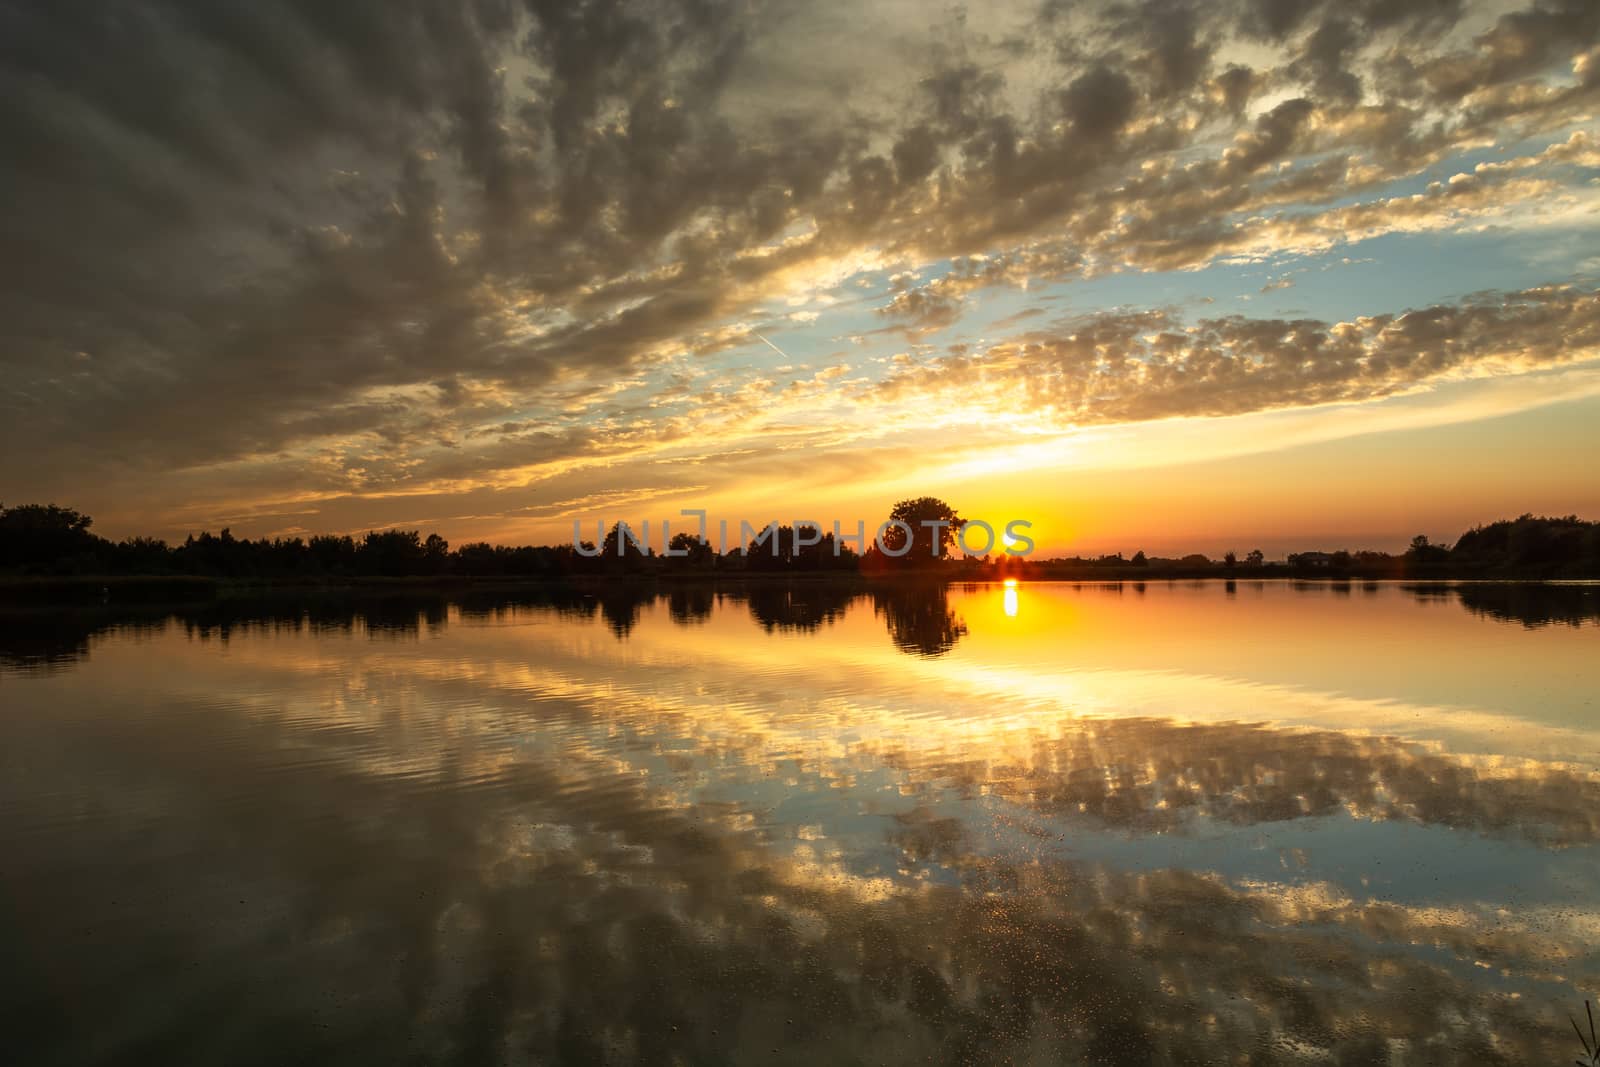 Sunset and reflection of clouds in water, evening landscape